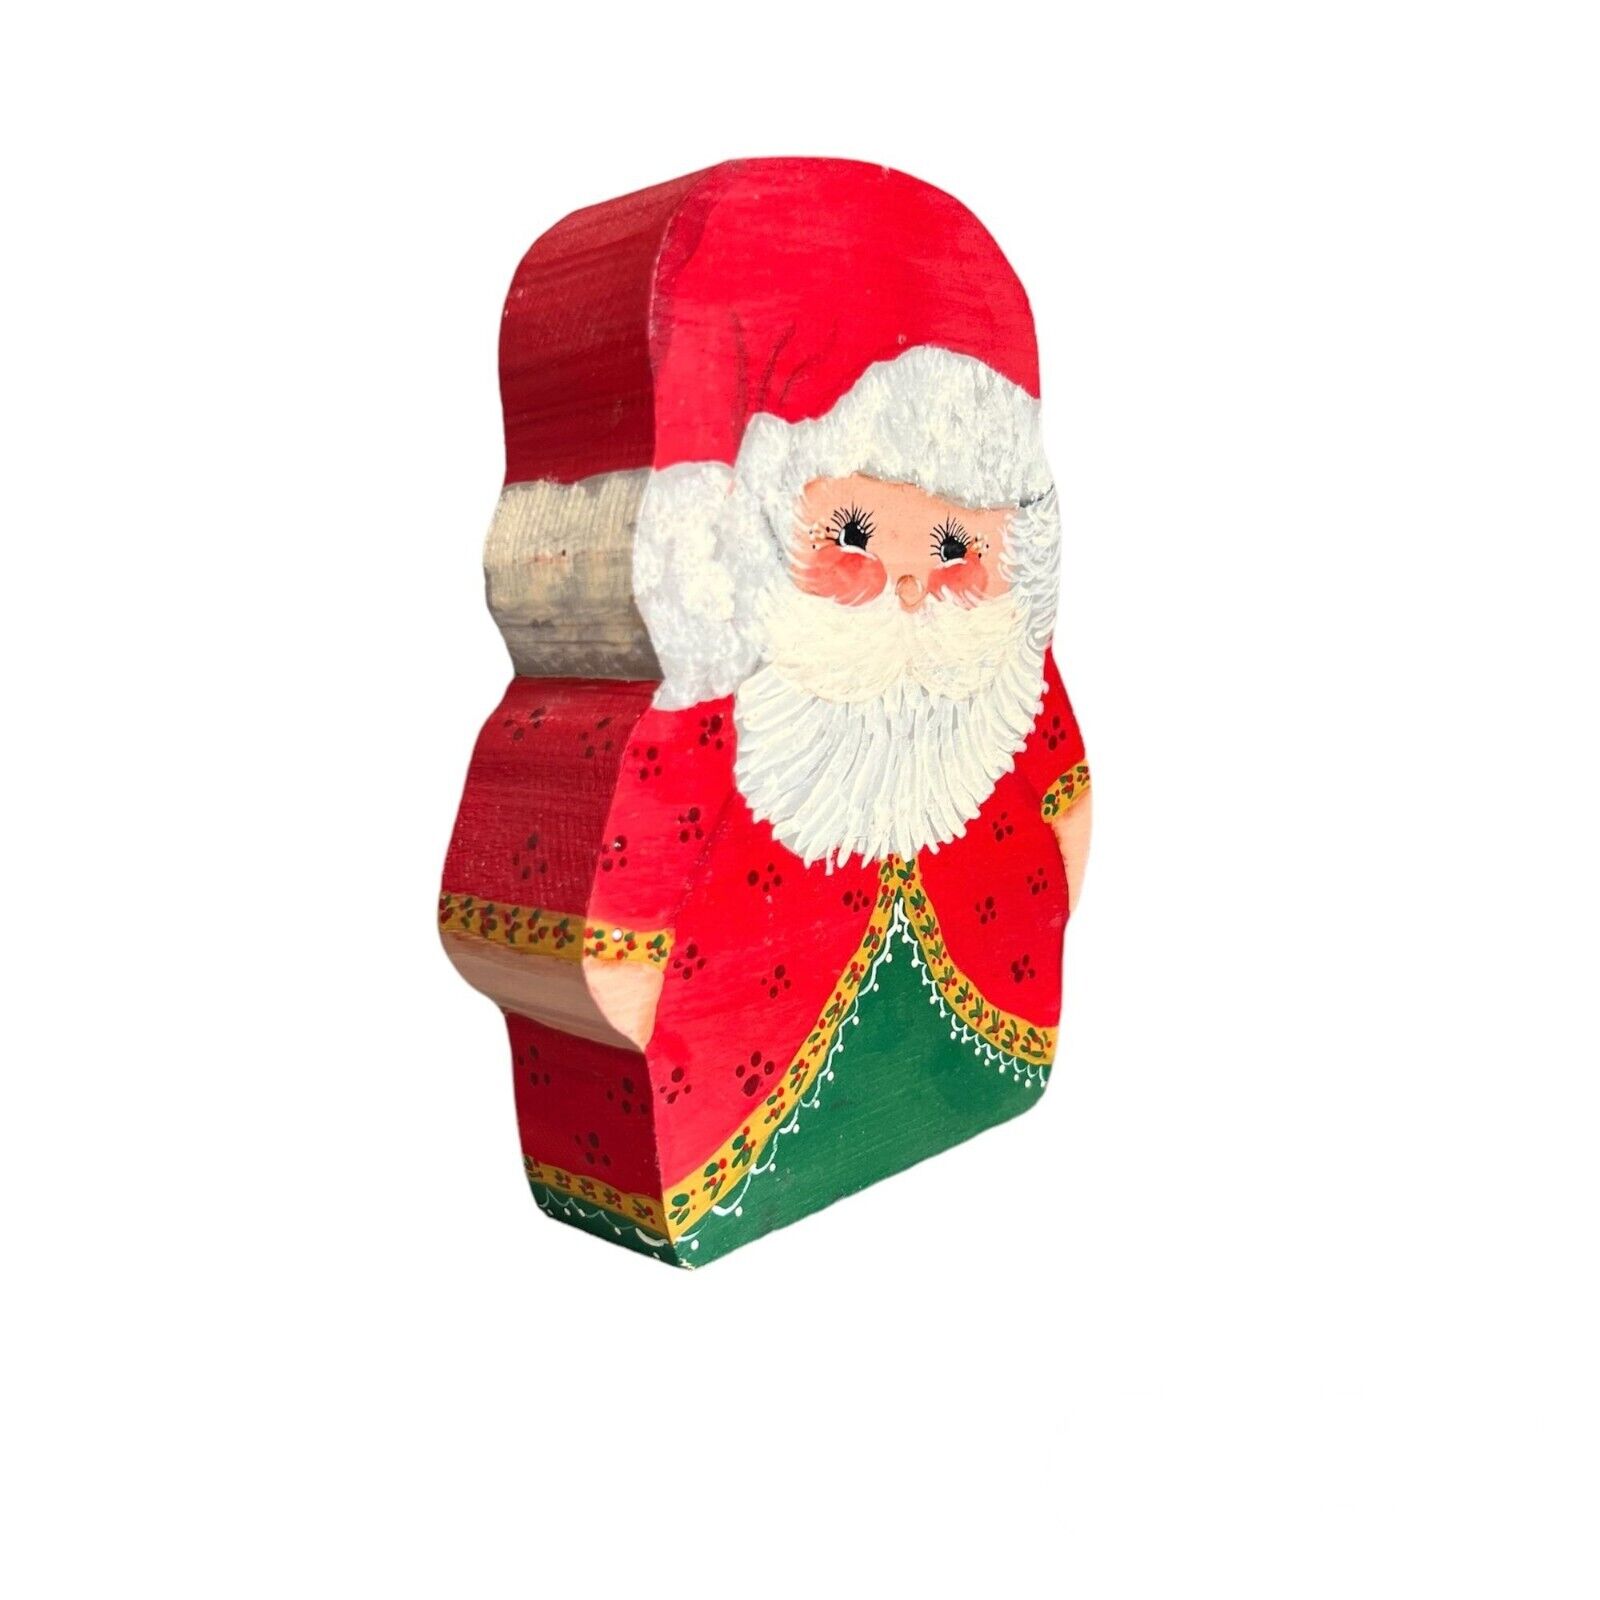 Vintage Wooden Painted Santa Claus Block Candle Holder 6 3/4